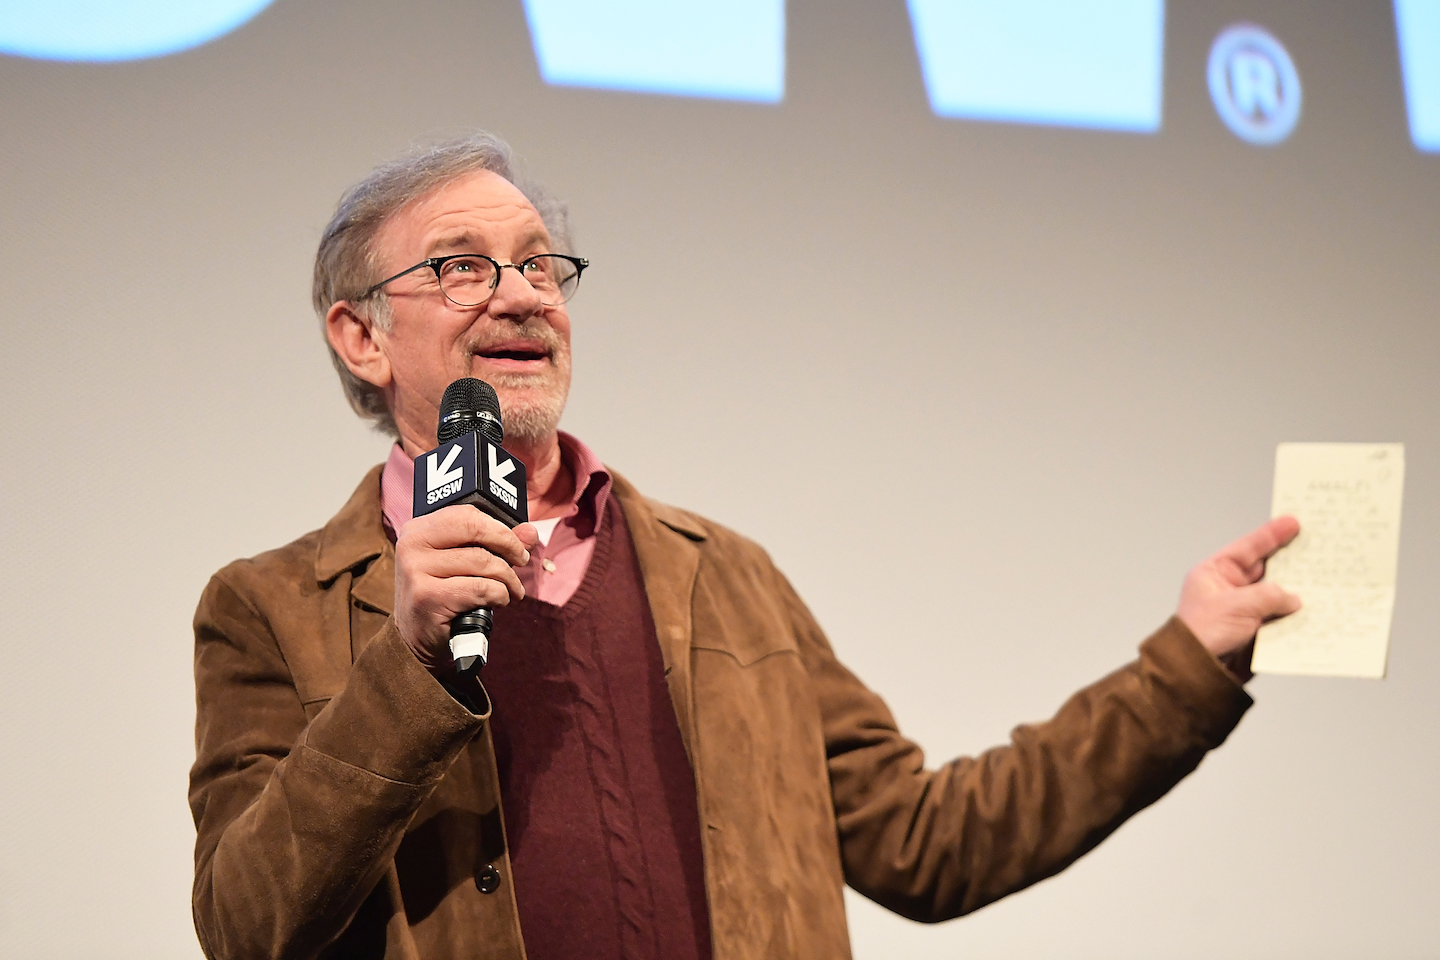 Director Steven Spielberg attends the Ready Player One world premiere. Photo by Matt Winkelmeyer/Getty Images for SXSW